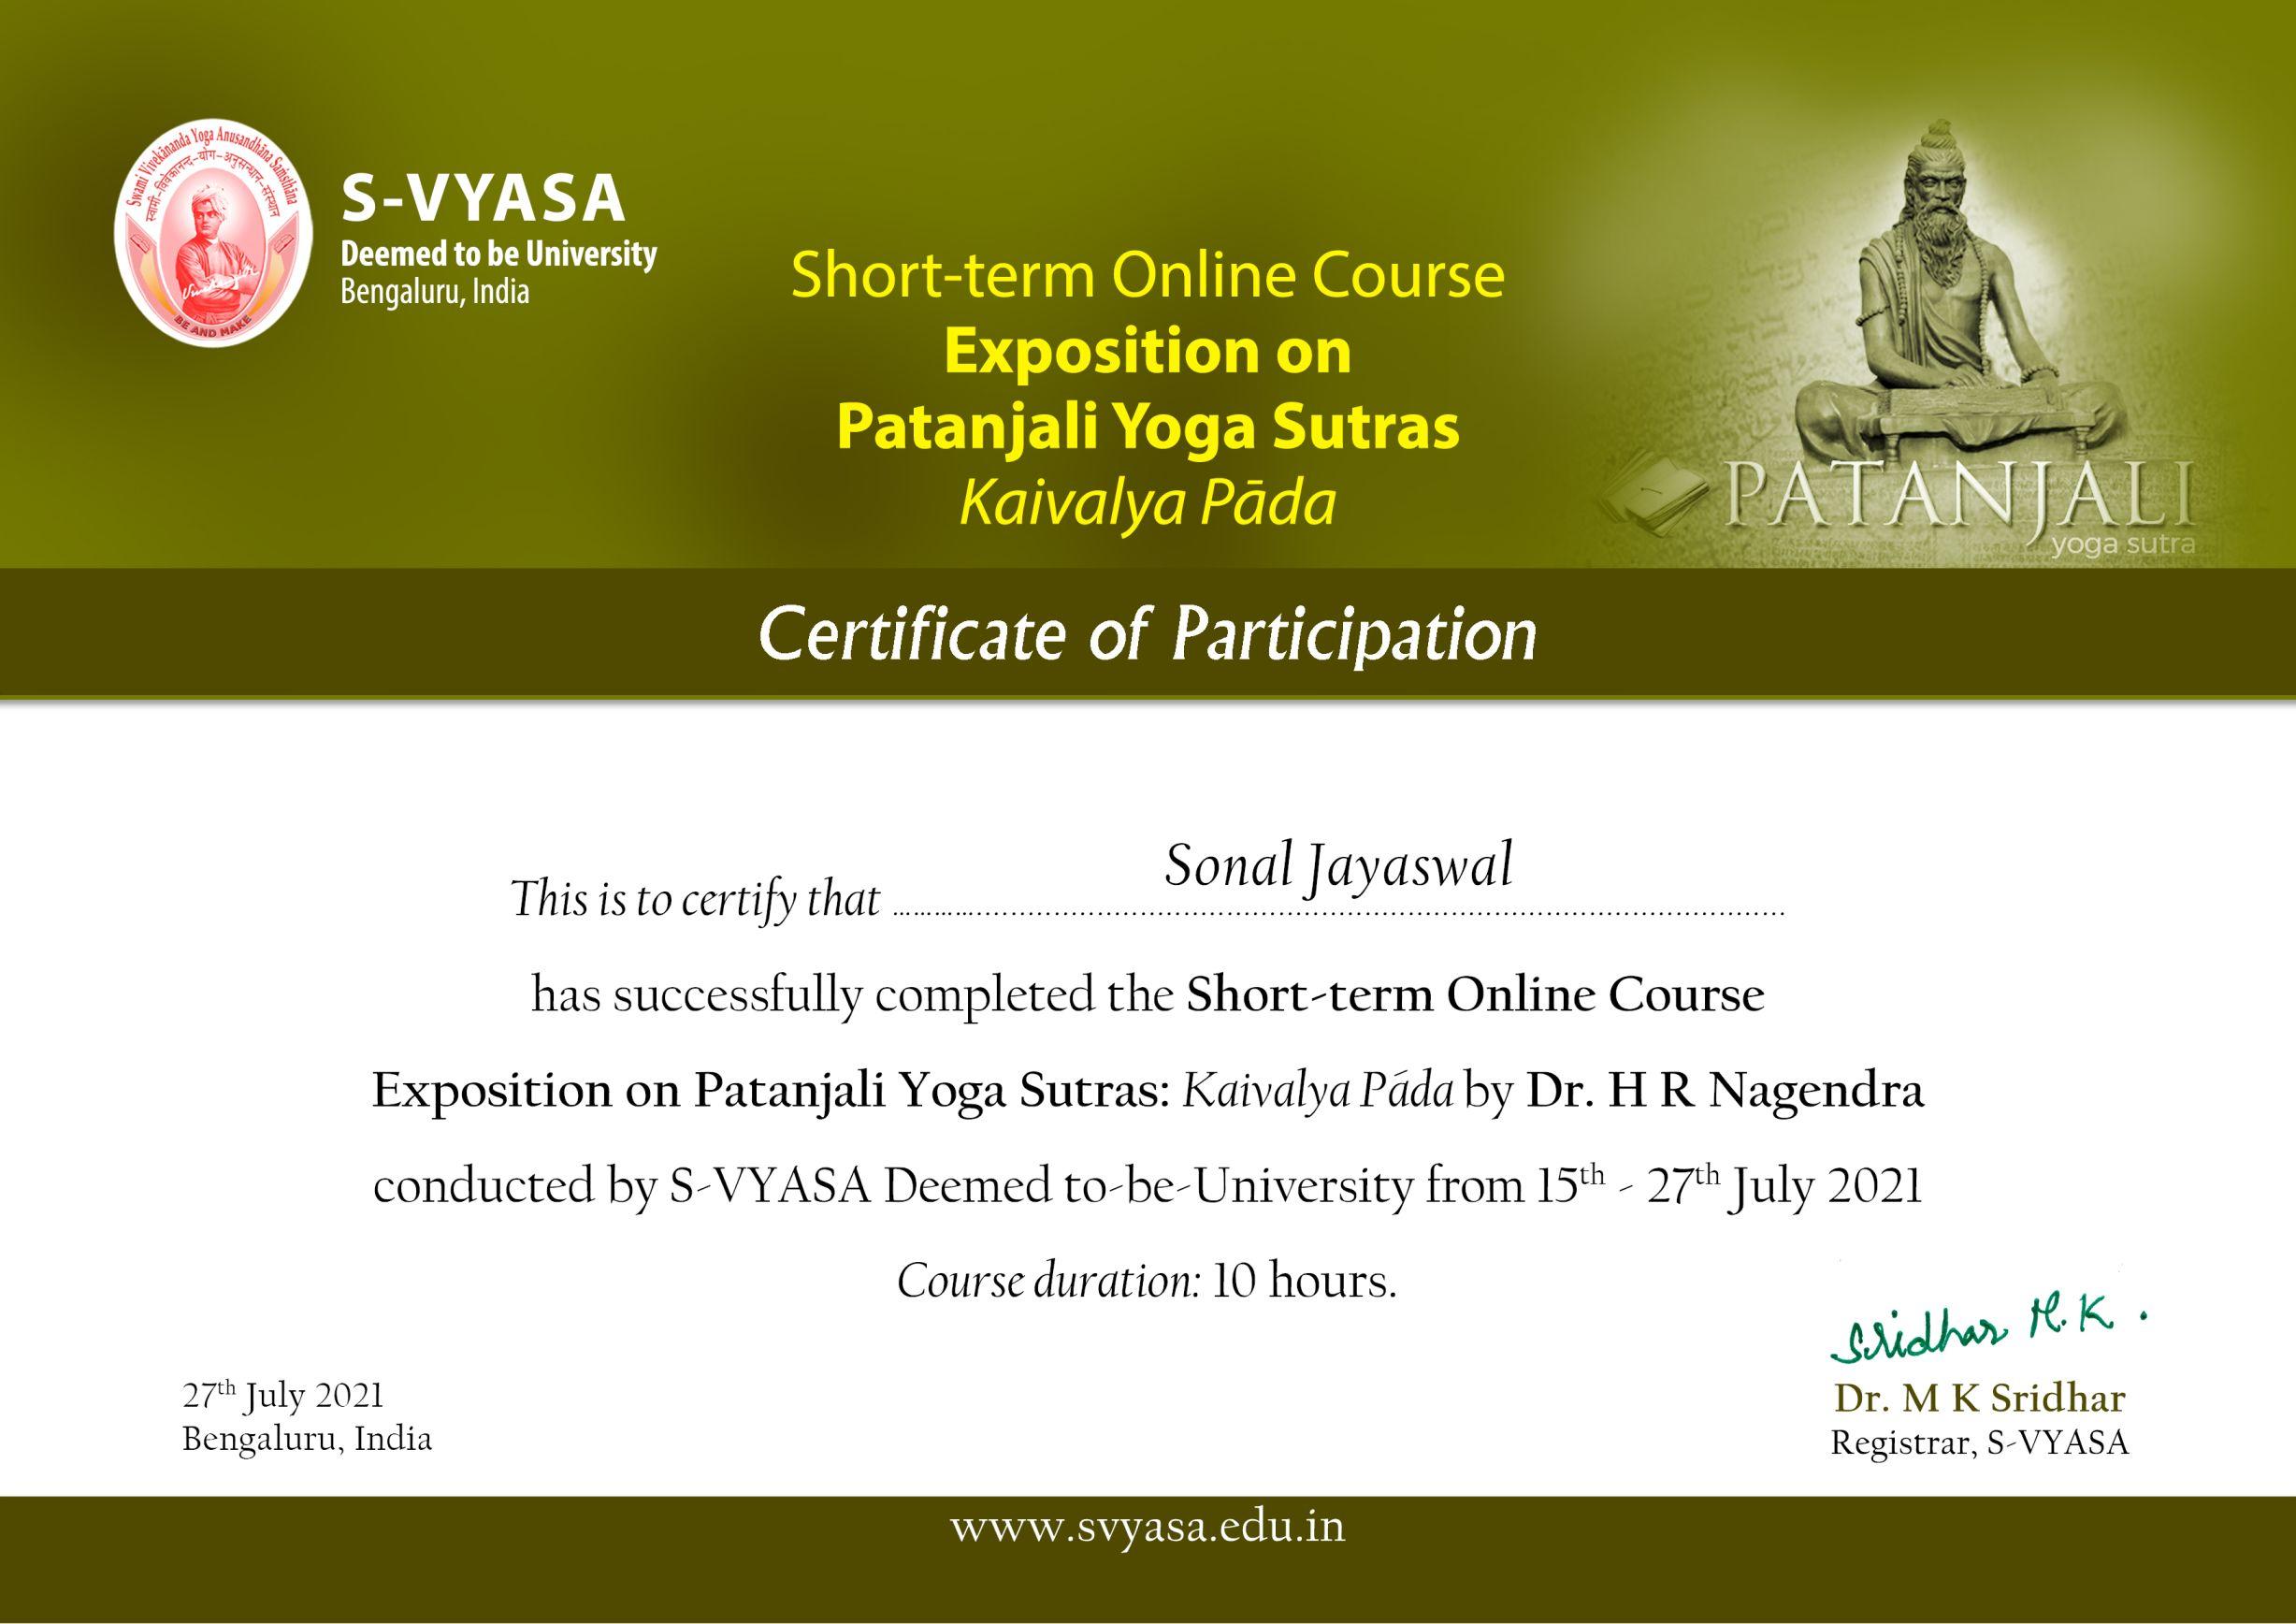 27 07 21 online course exposition on patanjali yoga sutras kaivalya pada certificate25